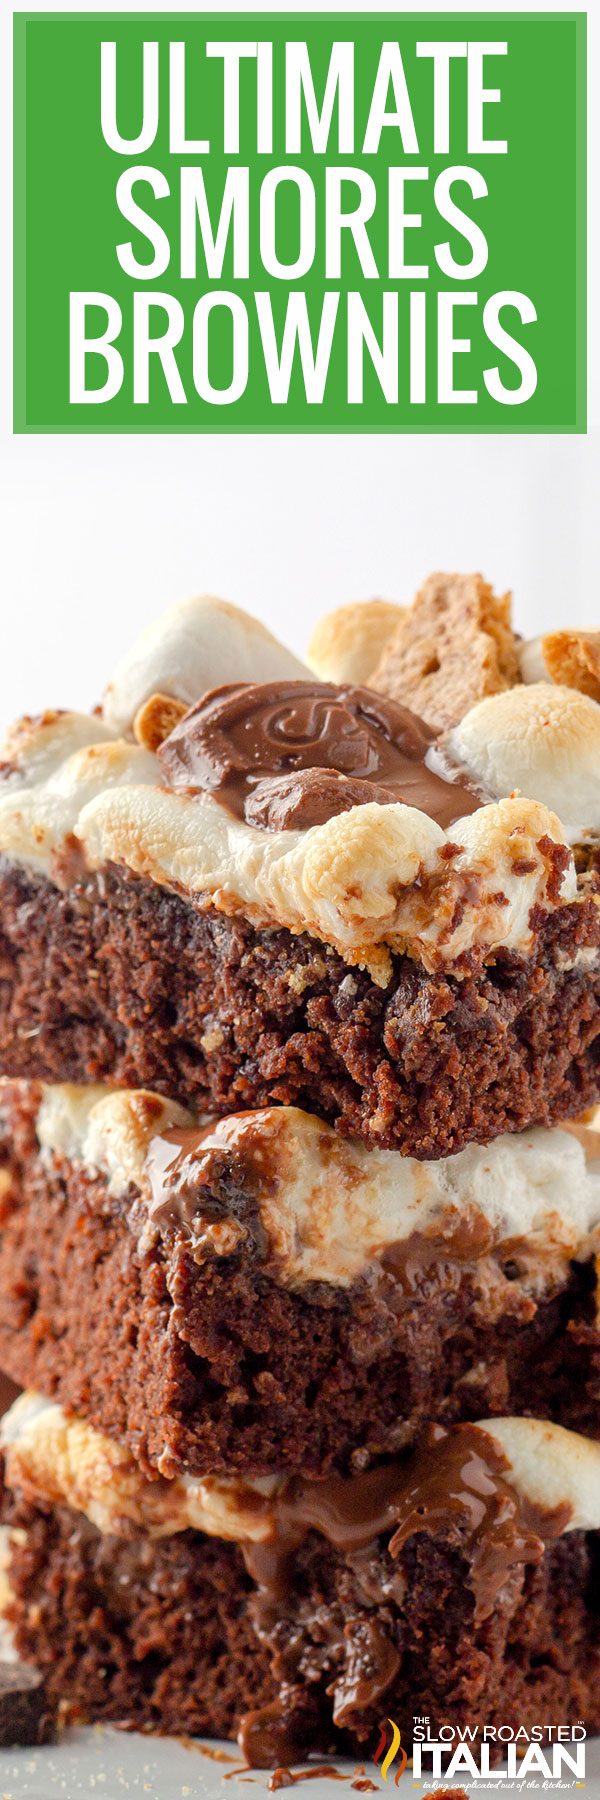 titled image for ultimate smores brownies